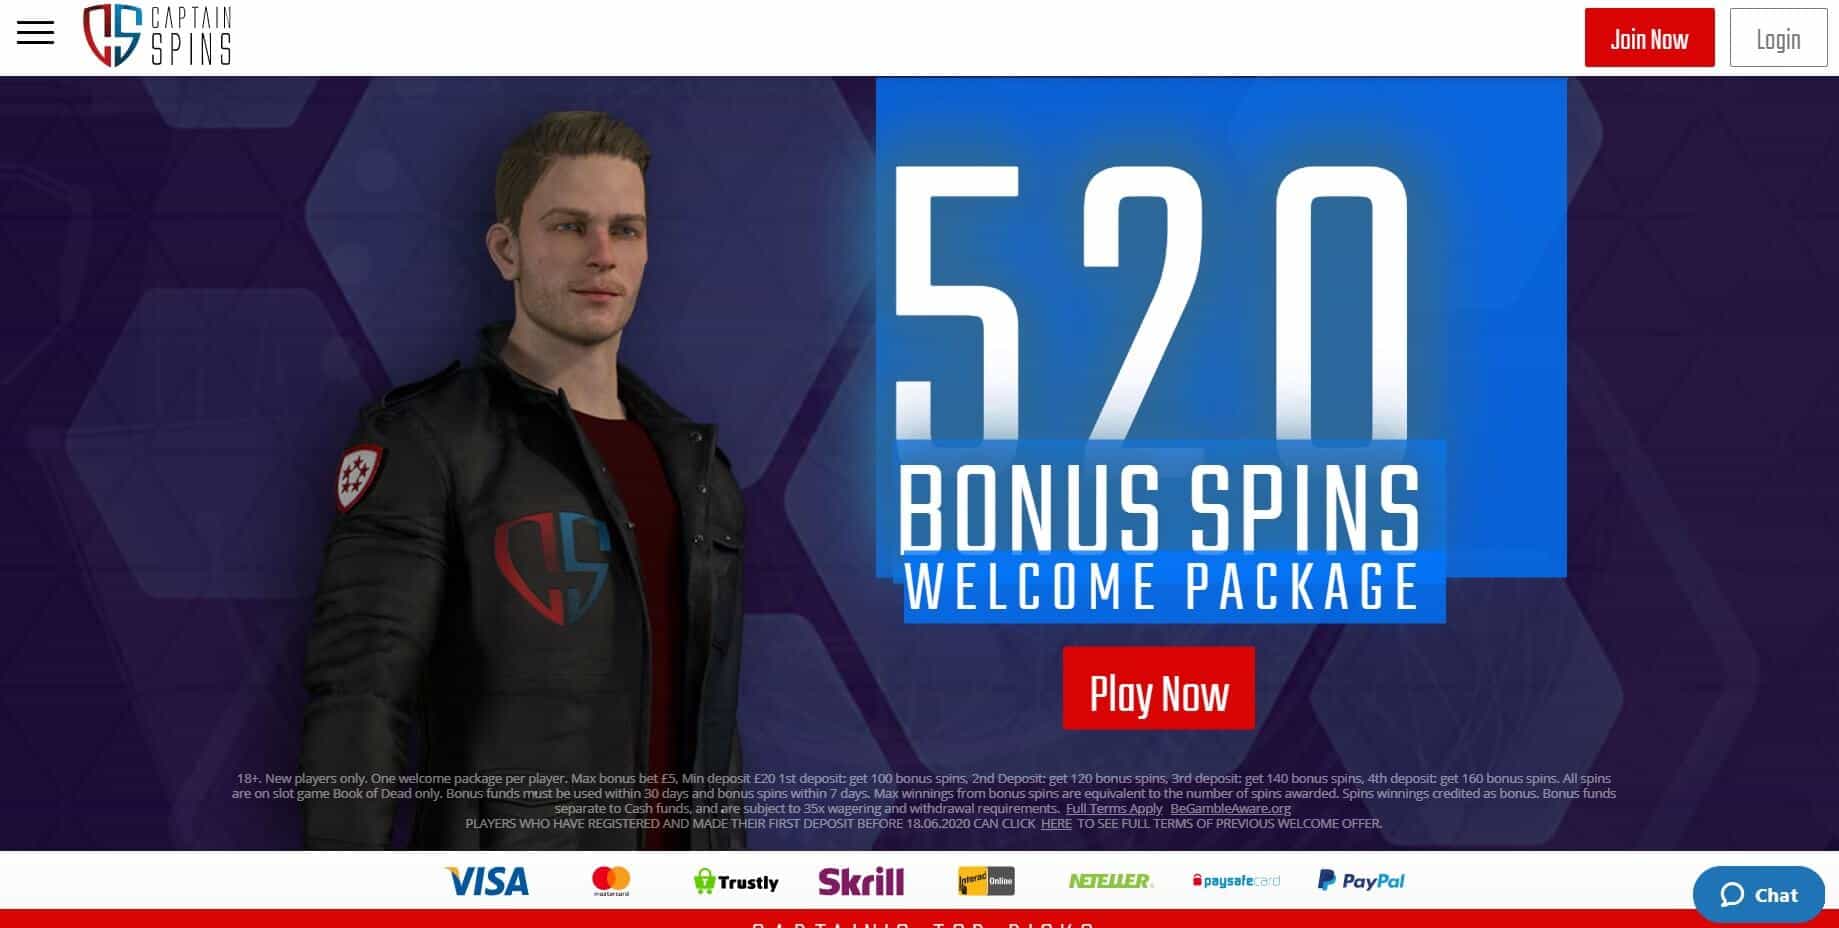 Captain Spins Casino homepage